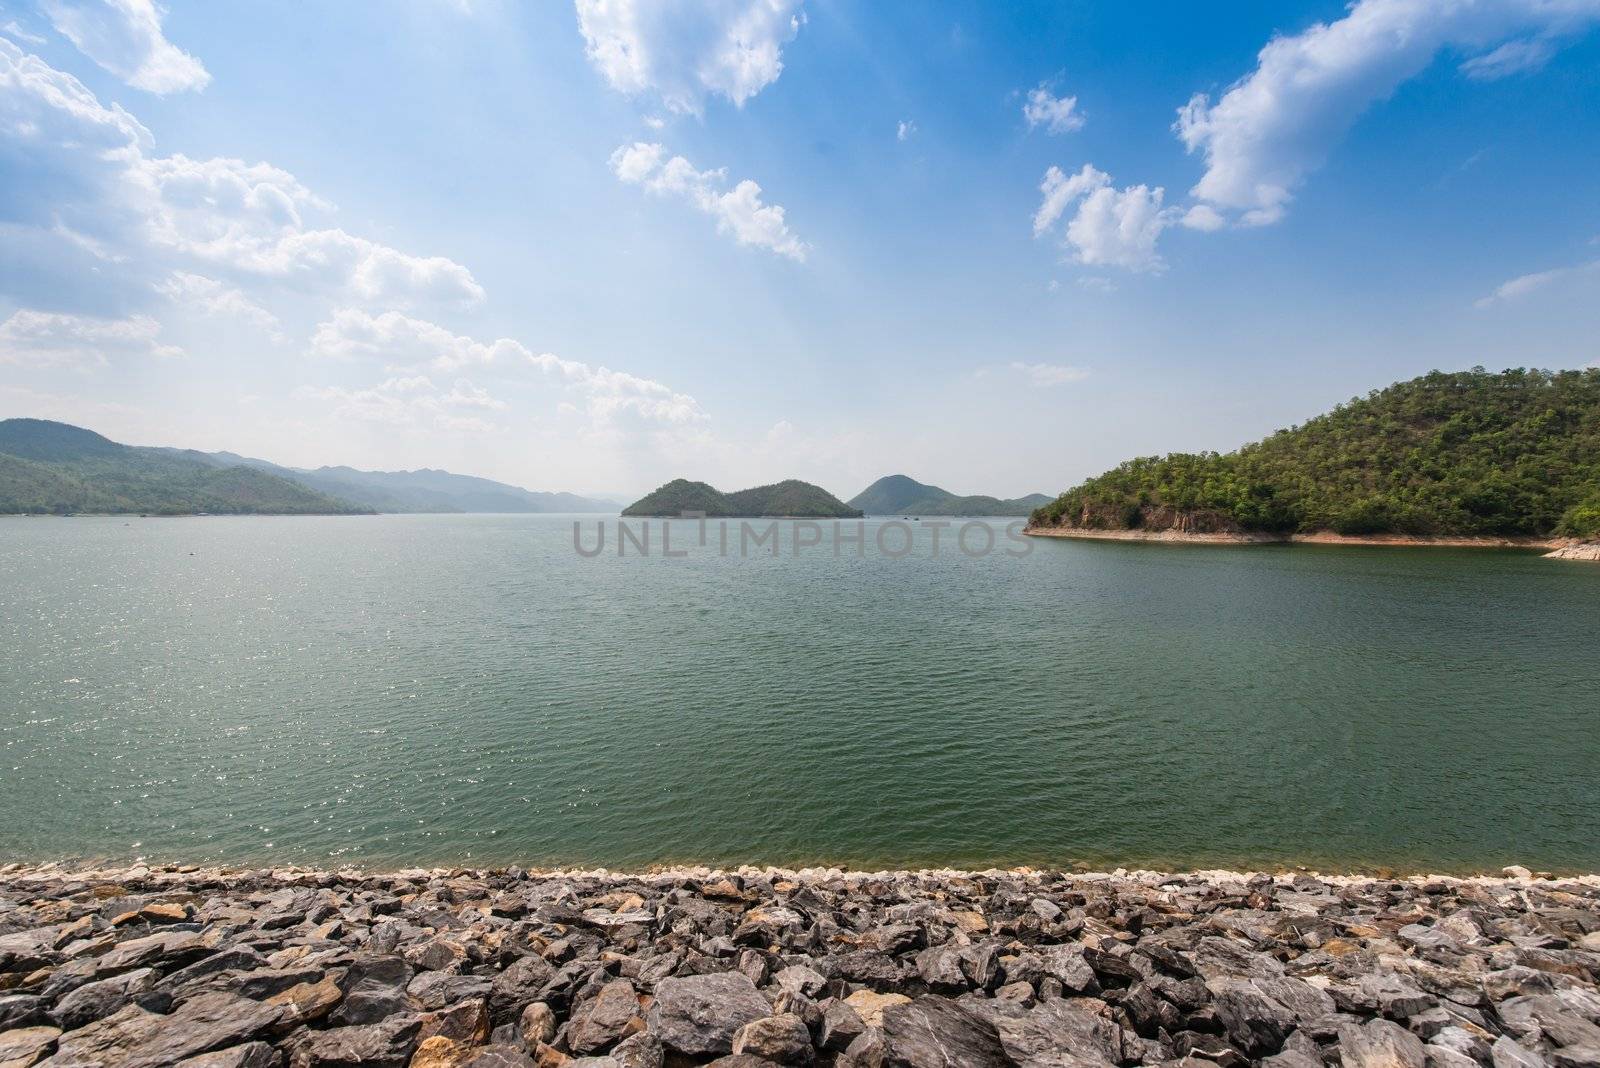 A man made lake as a result of a dam setting up in Thailand, taken on a cloudy day